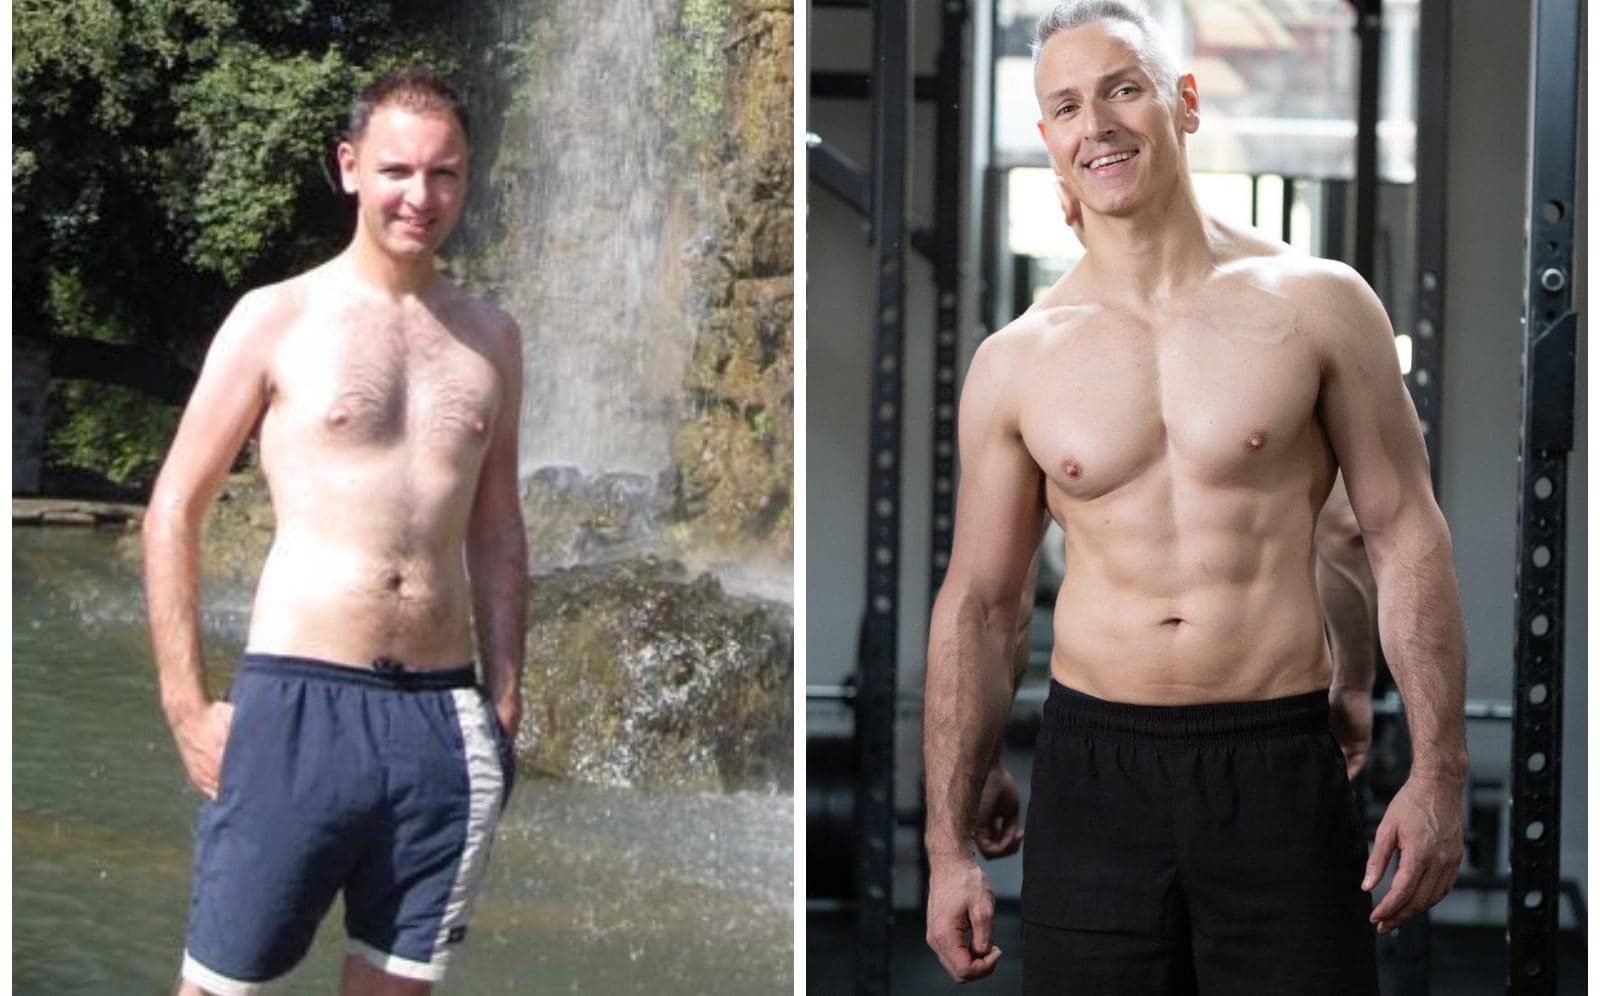 eating more protein helped me lose my ‘skinny fat’ dad bod